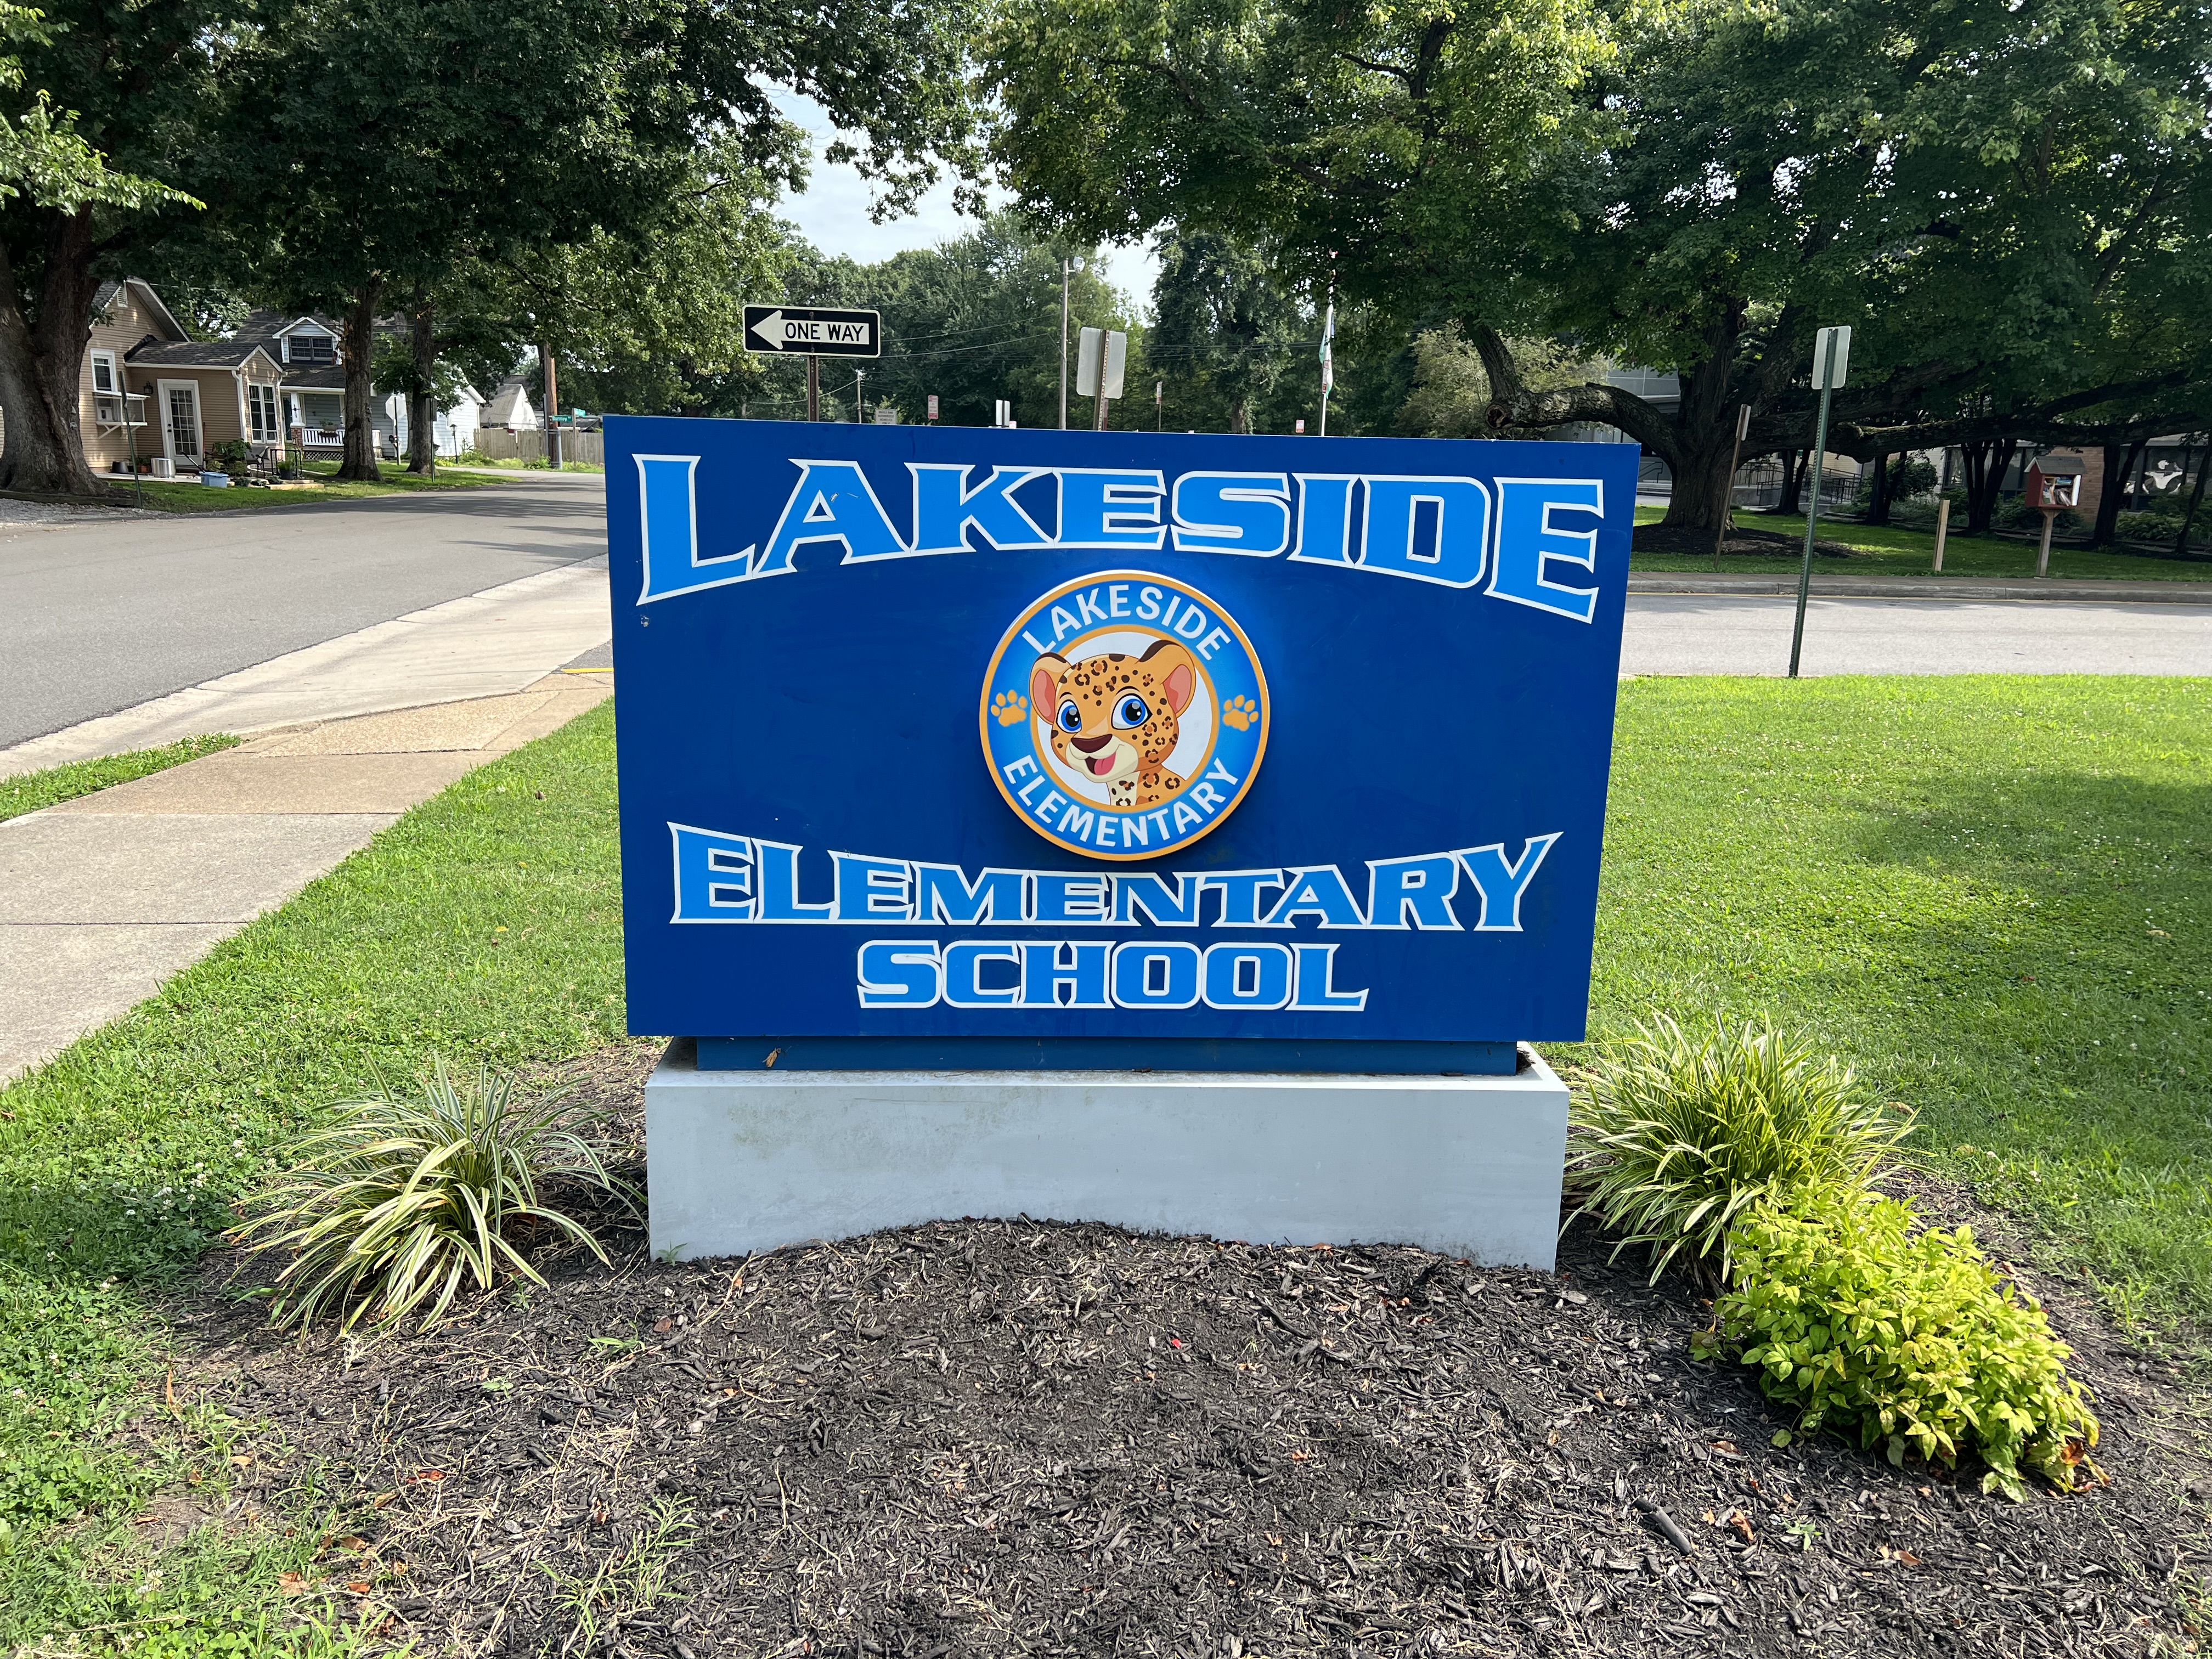 Lakeside Sign with Leopard Image